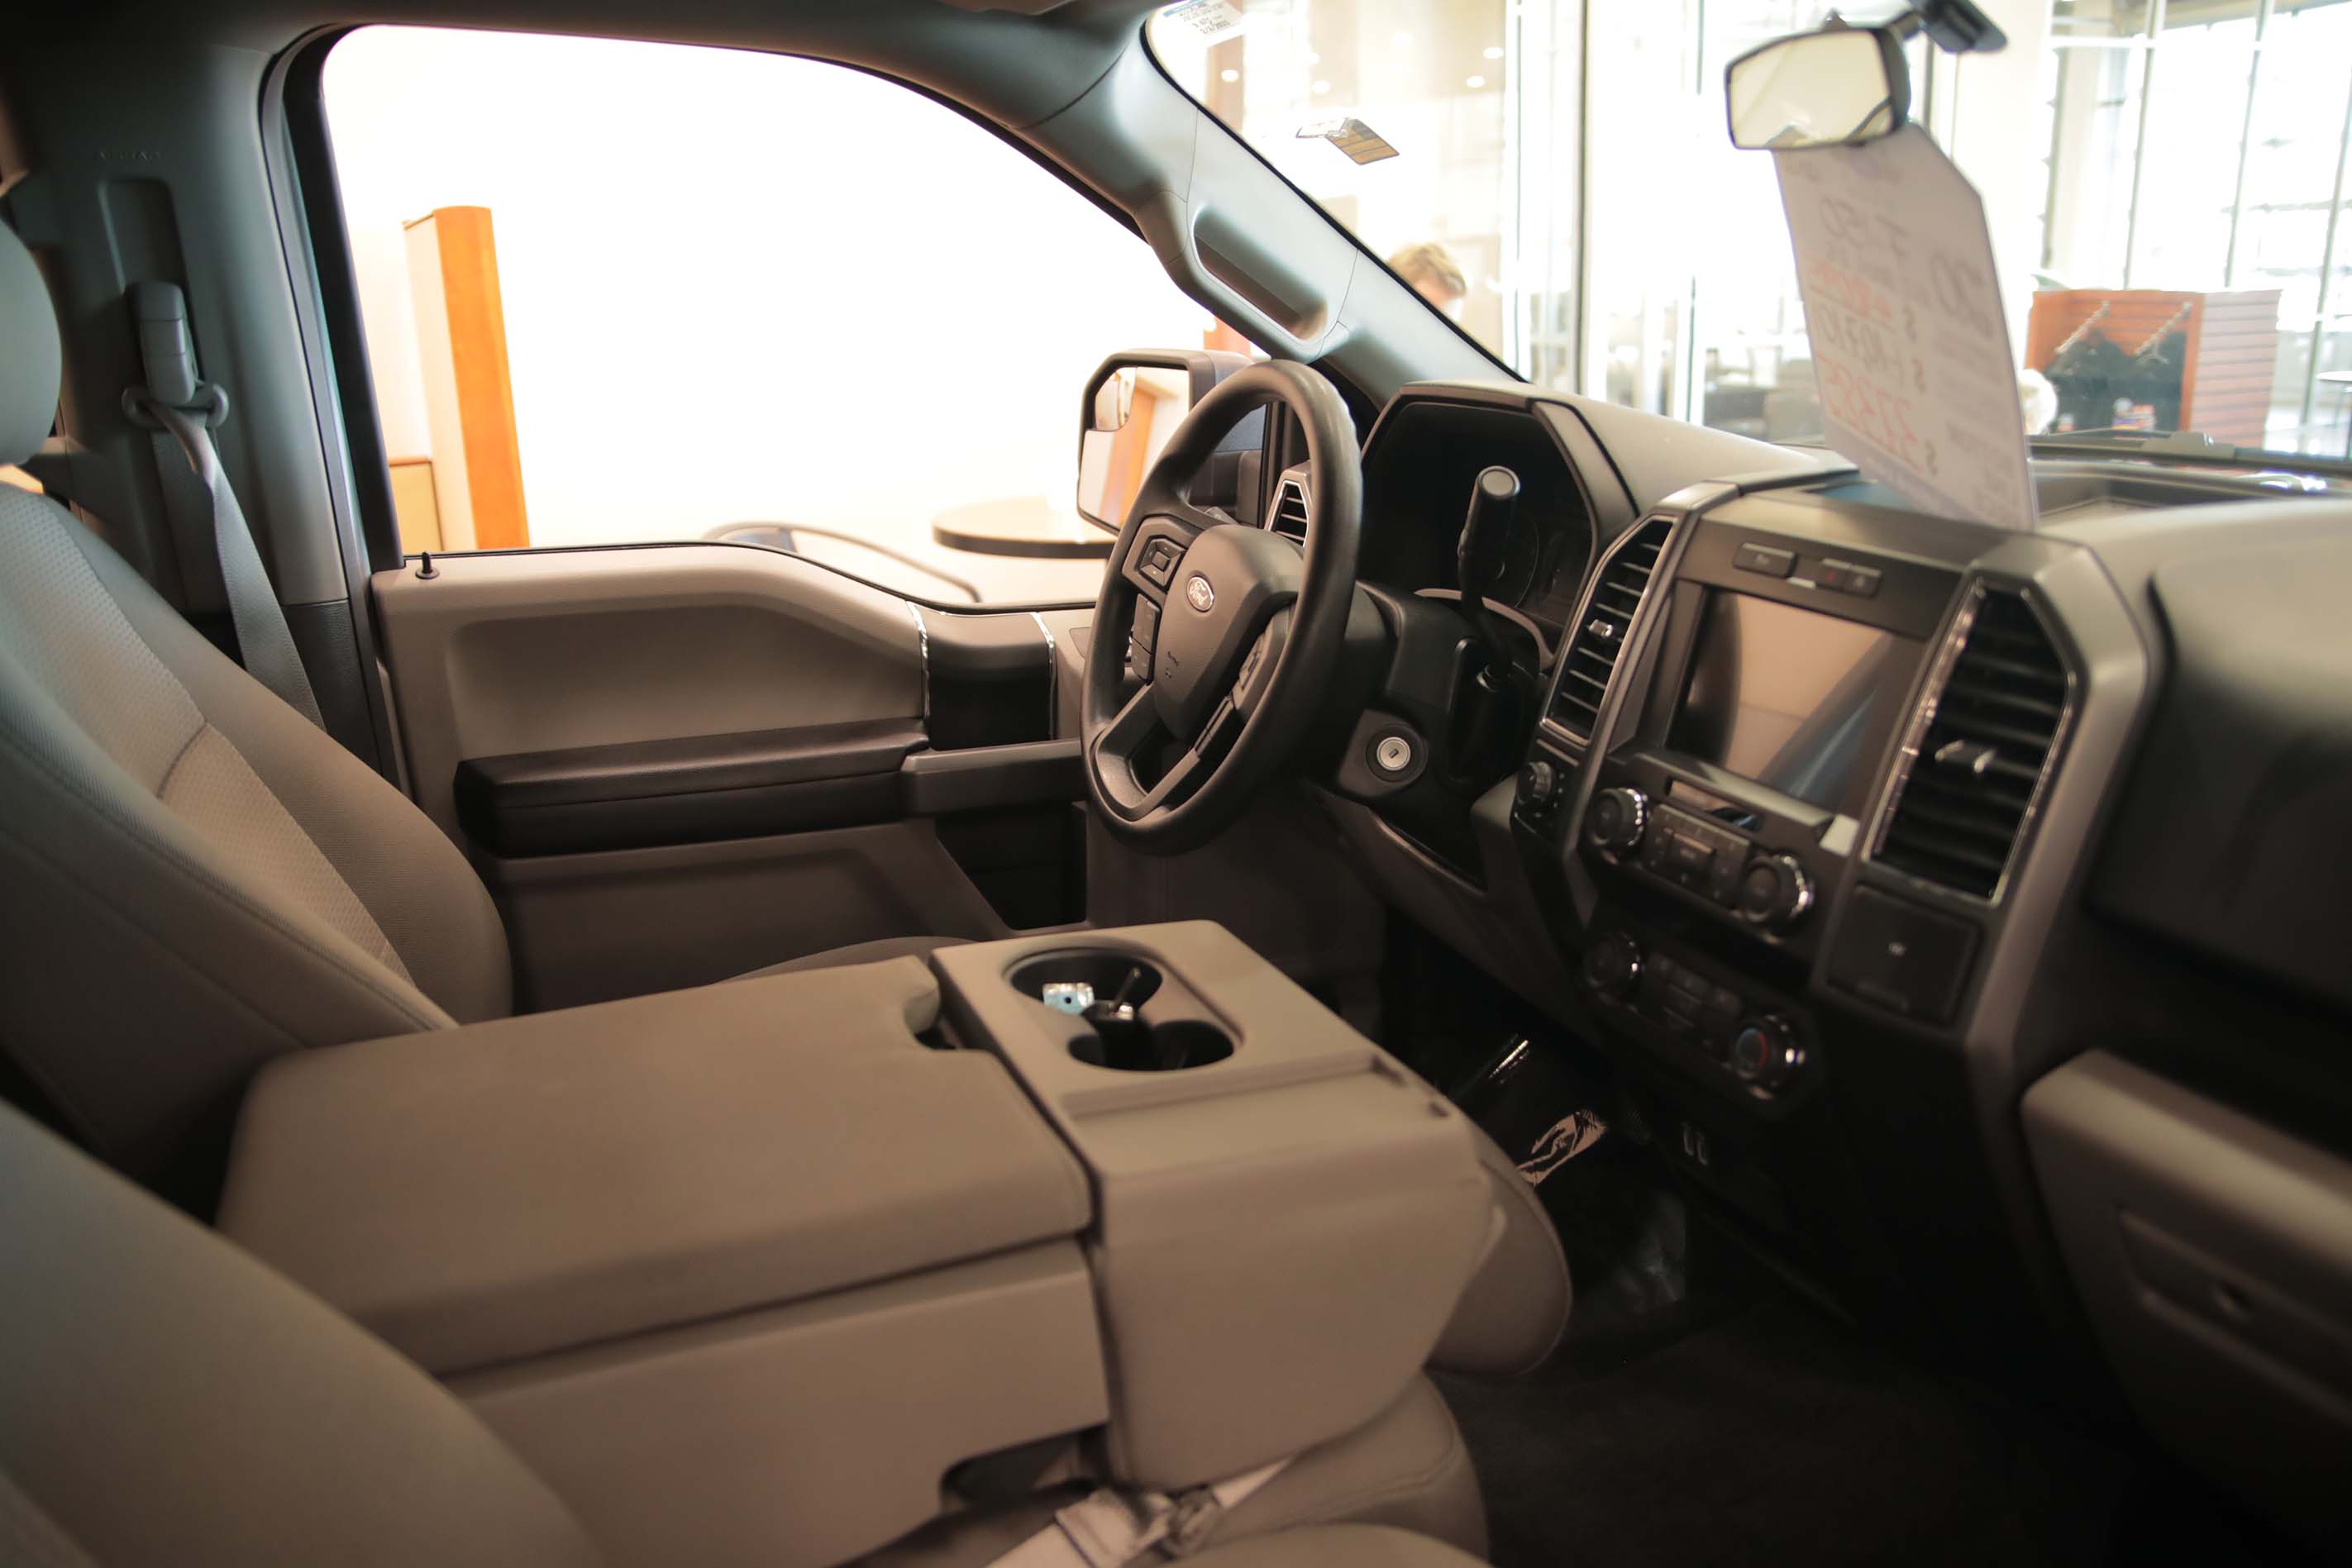 Used truck interior at Fort Dodge Ford in Fort Dodge.